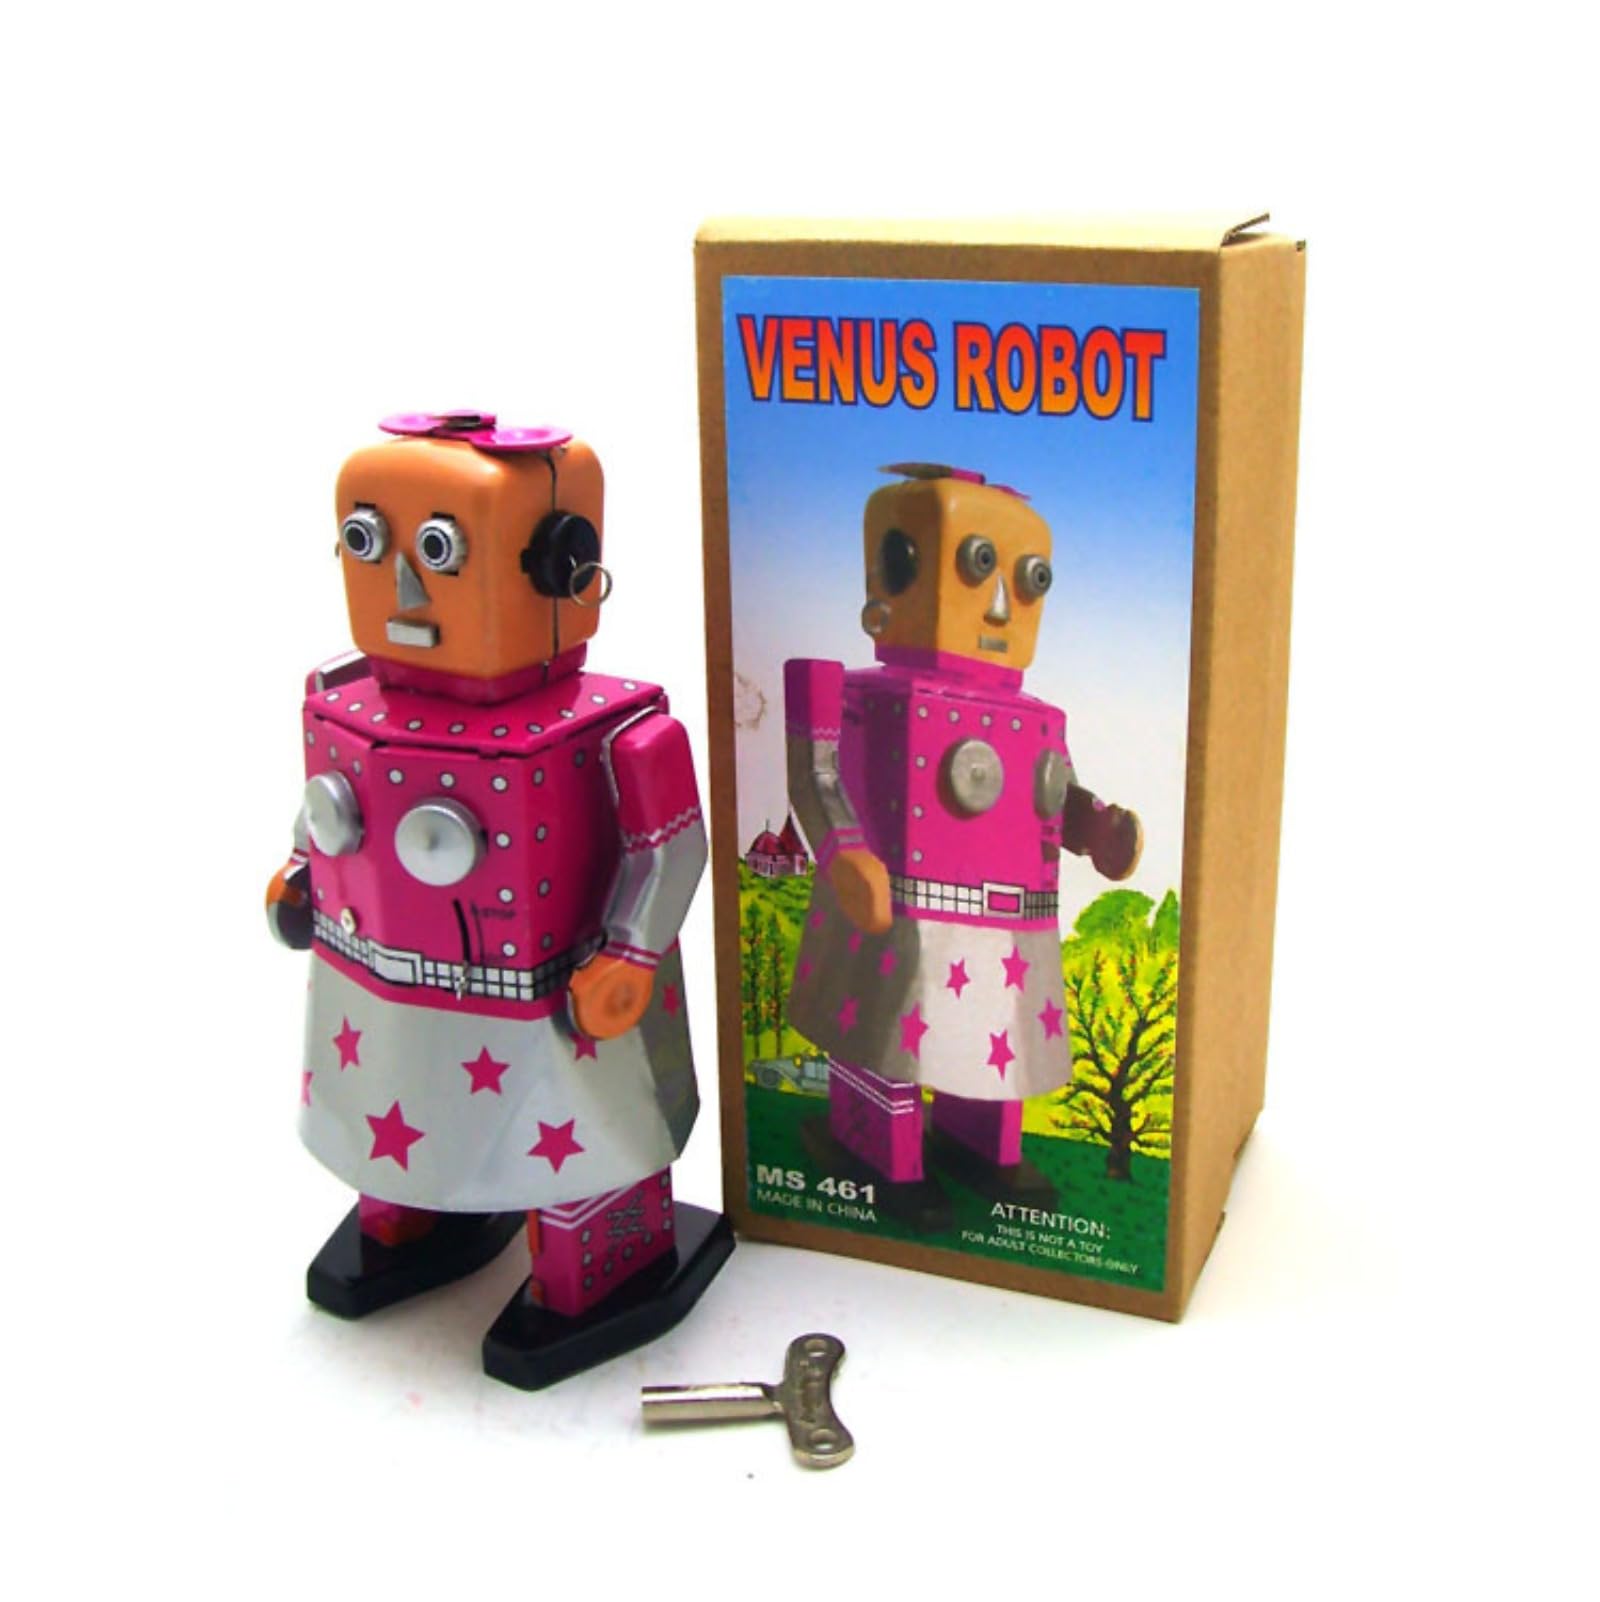 Charmgle Venus Robot Retro Tin Toy Novelty Gift Tin Robot Wind-Up Toy Party Favor Bar Clothing Shop Home Decoration Adult Collection